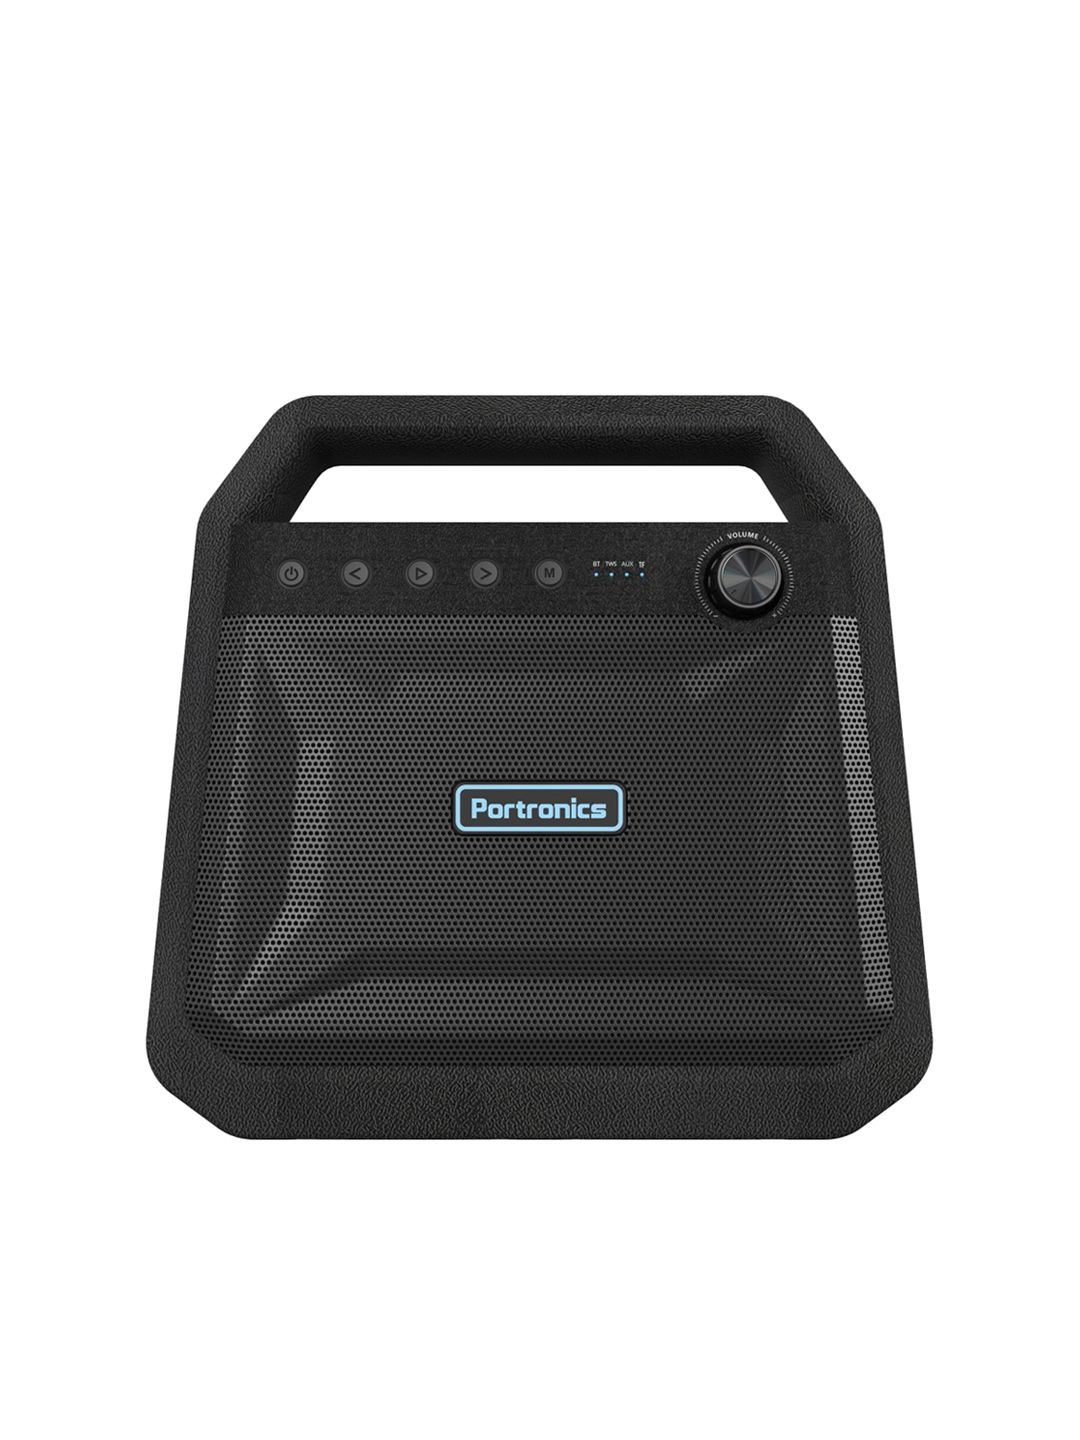 Portronics Black Solid Roar Portable Truly Wireless Bluetooth Speaker Price in India